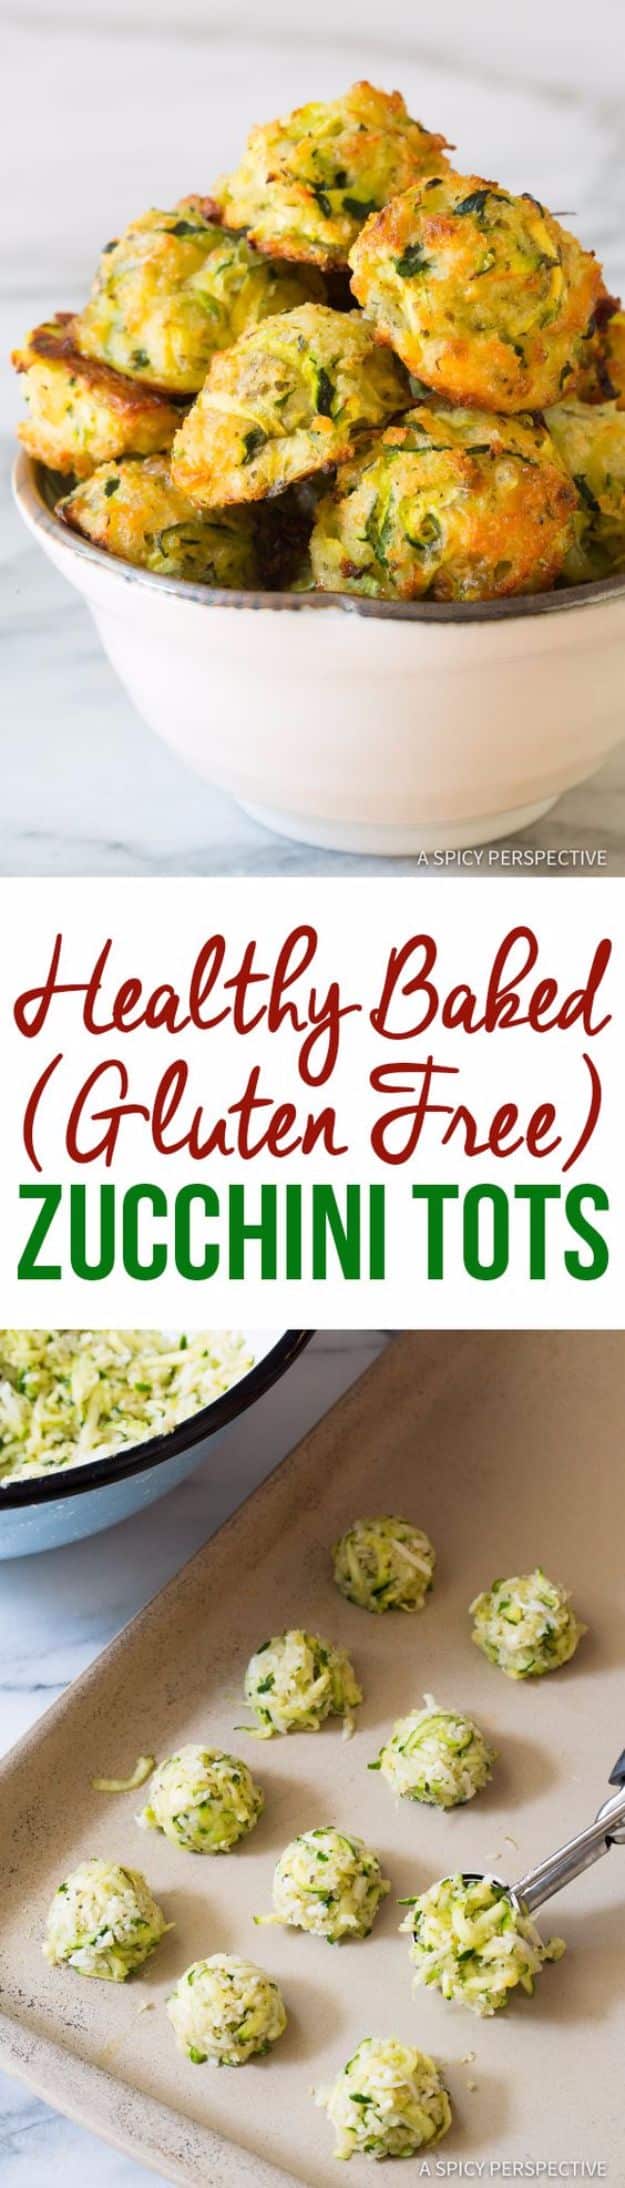 Gluten Free Recipes - Healthy Baked Zucchini Tots - Easy Vegetarian or Vegan Recipes For Dinner and For Dessert - How To Make Healthy Glutenfree Bread and Appetizers For Kids - Fun Crockpot Recipes For Breakfast While On A Budget http://diyjoy.com/gluten-free-recipes